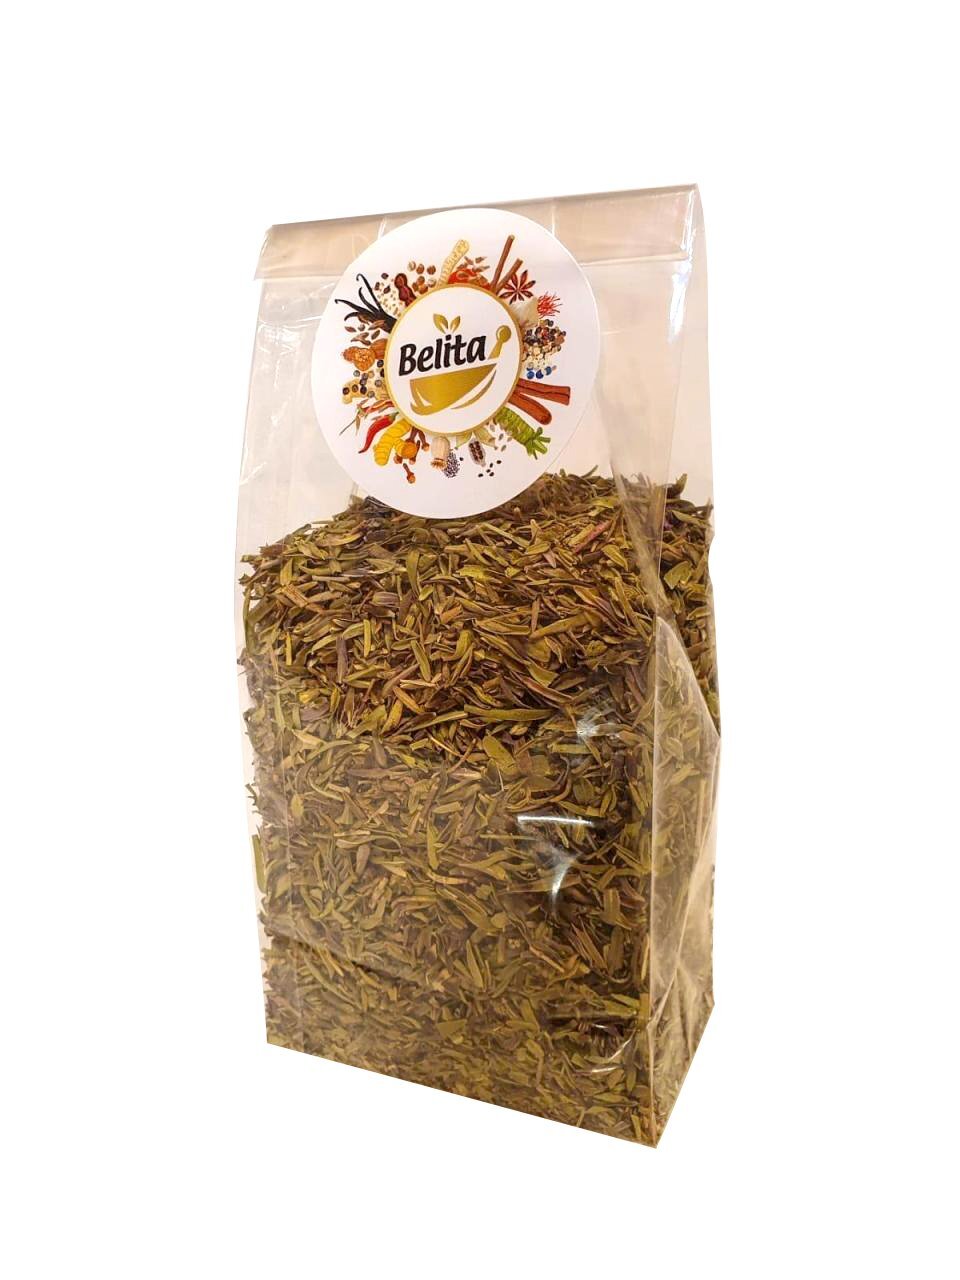 ZAHTER (A Different Type of Thyme) Powder ( Local Food) 100 Grams - B.3031